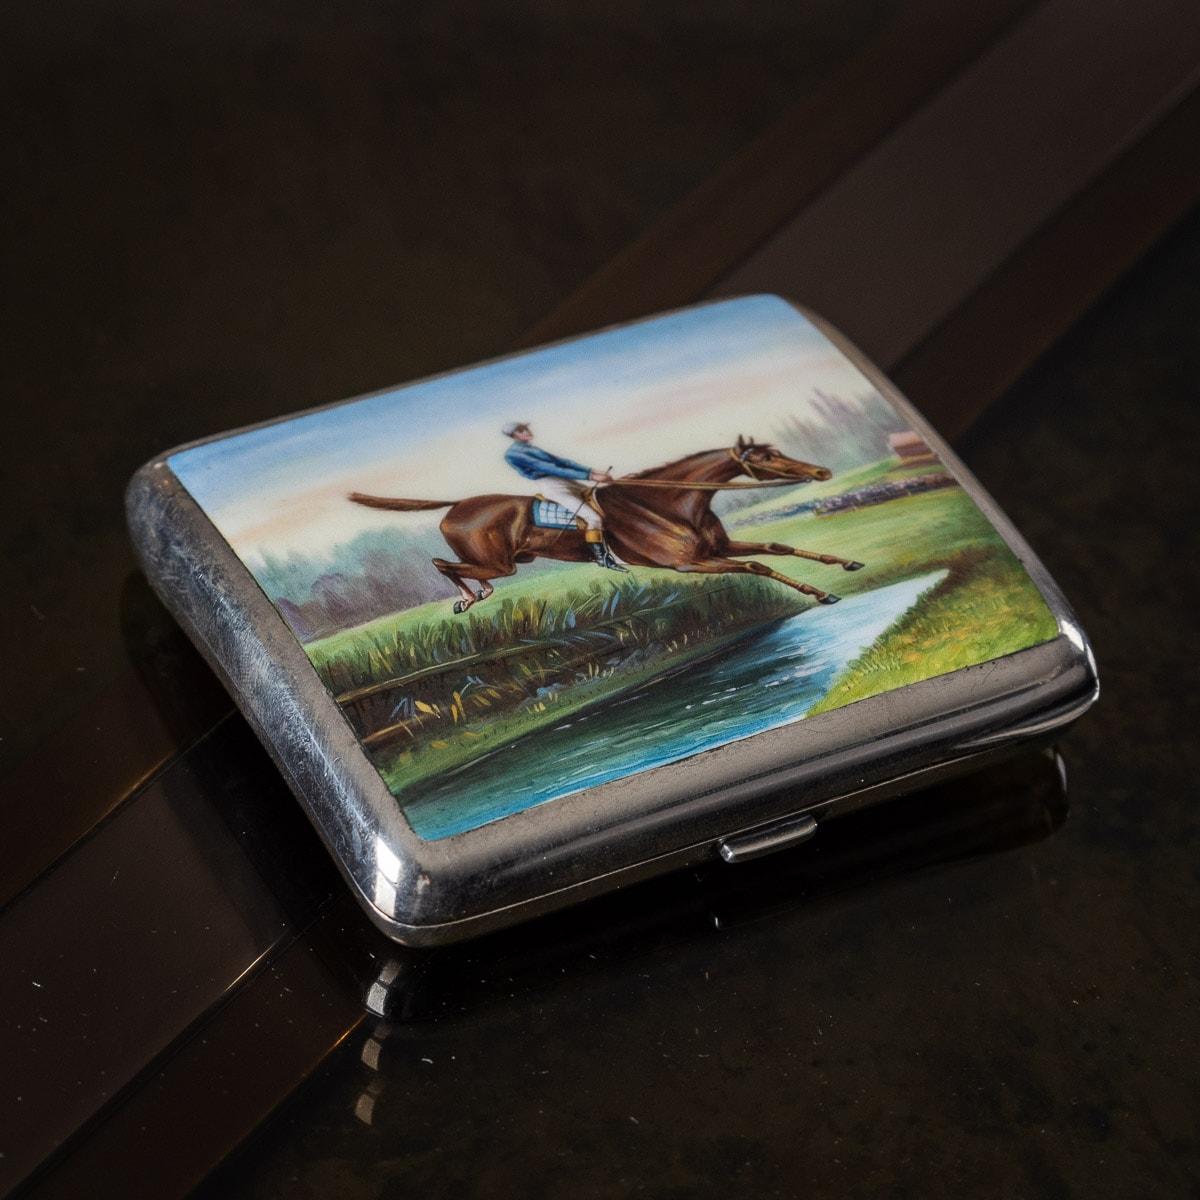 Antique early 20th Century German solid silver & enamel cigarette case, of slightly curved rectangular form with rounded corners, depicting a horse steeplechase and richly parcel gilt interior. Both sides are Hallmarked with English import silver